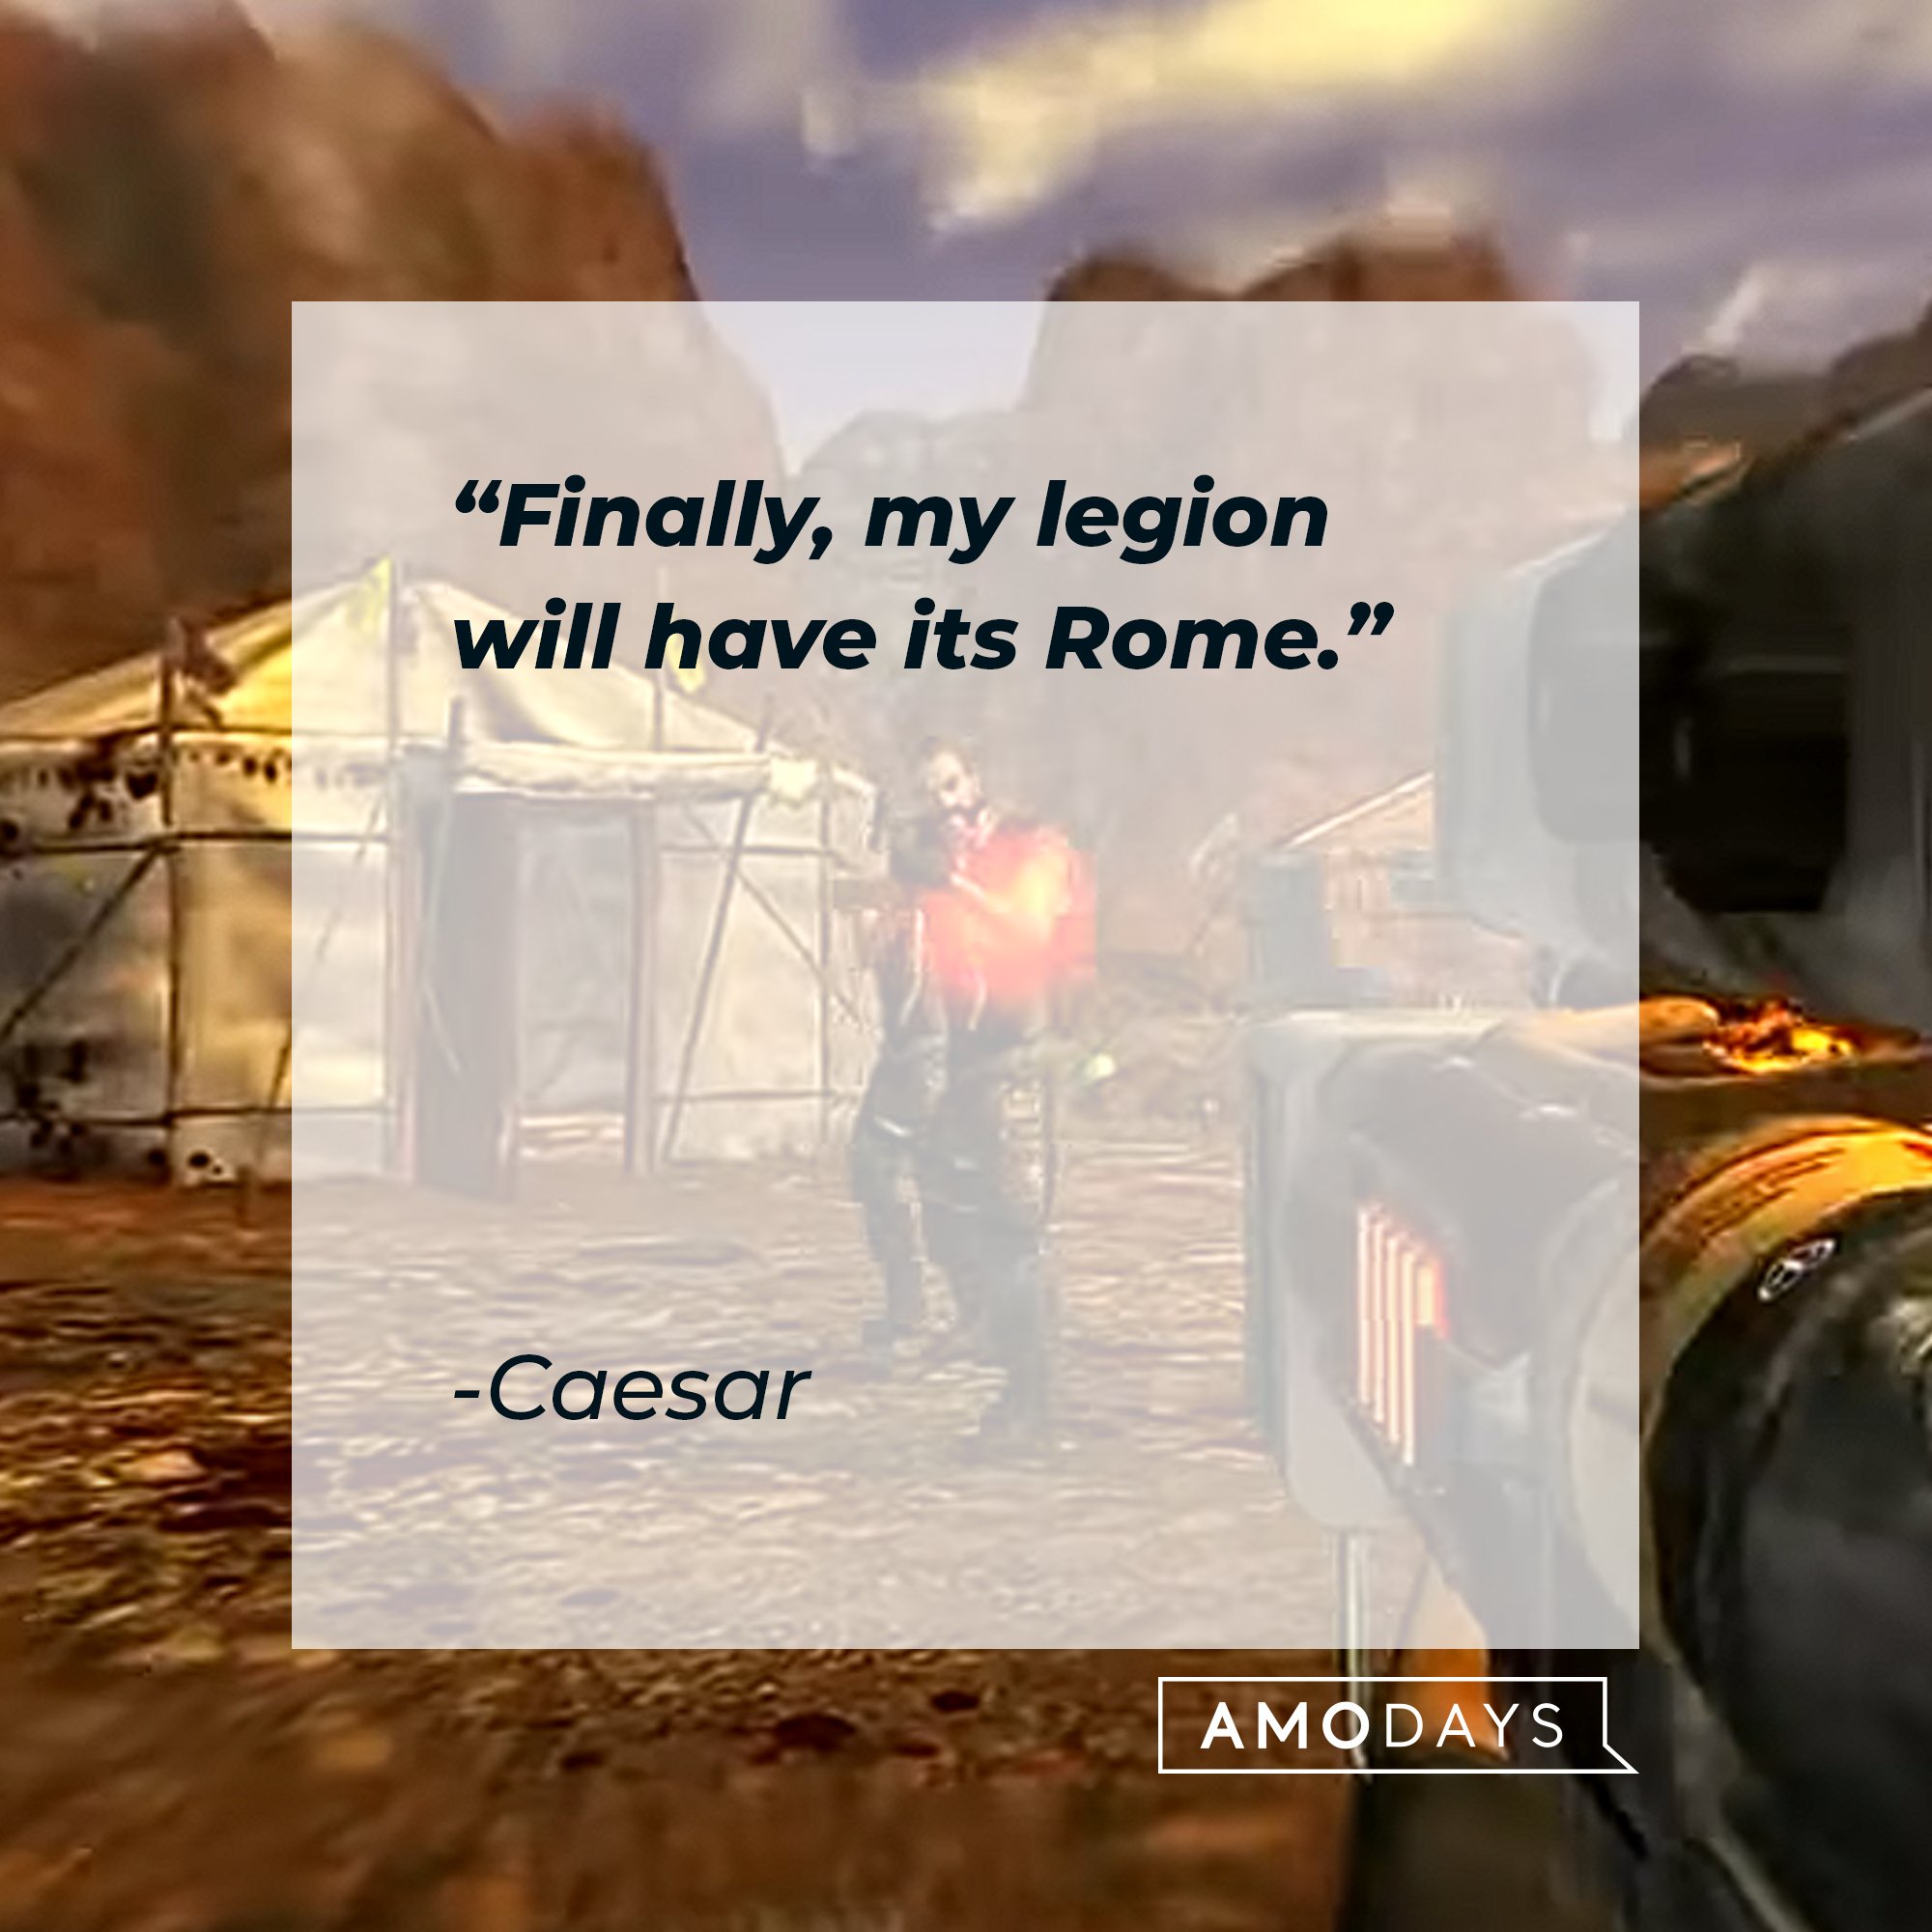 Caesar ‘s quote: "Finally, my legion will have its Rome." | Image: AmoDays